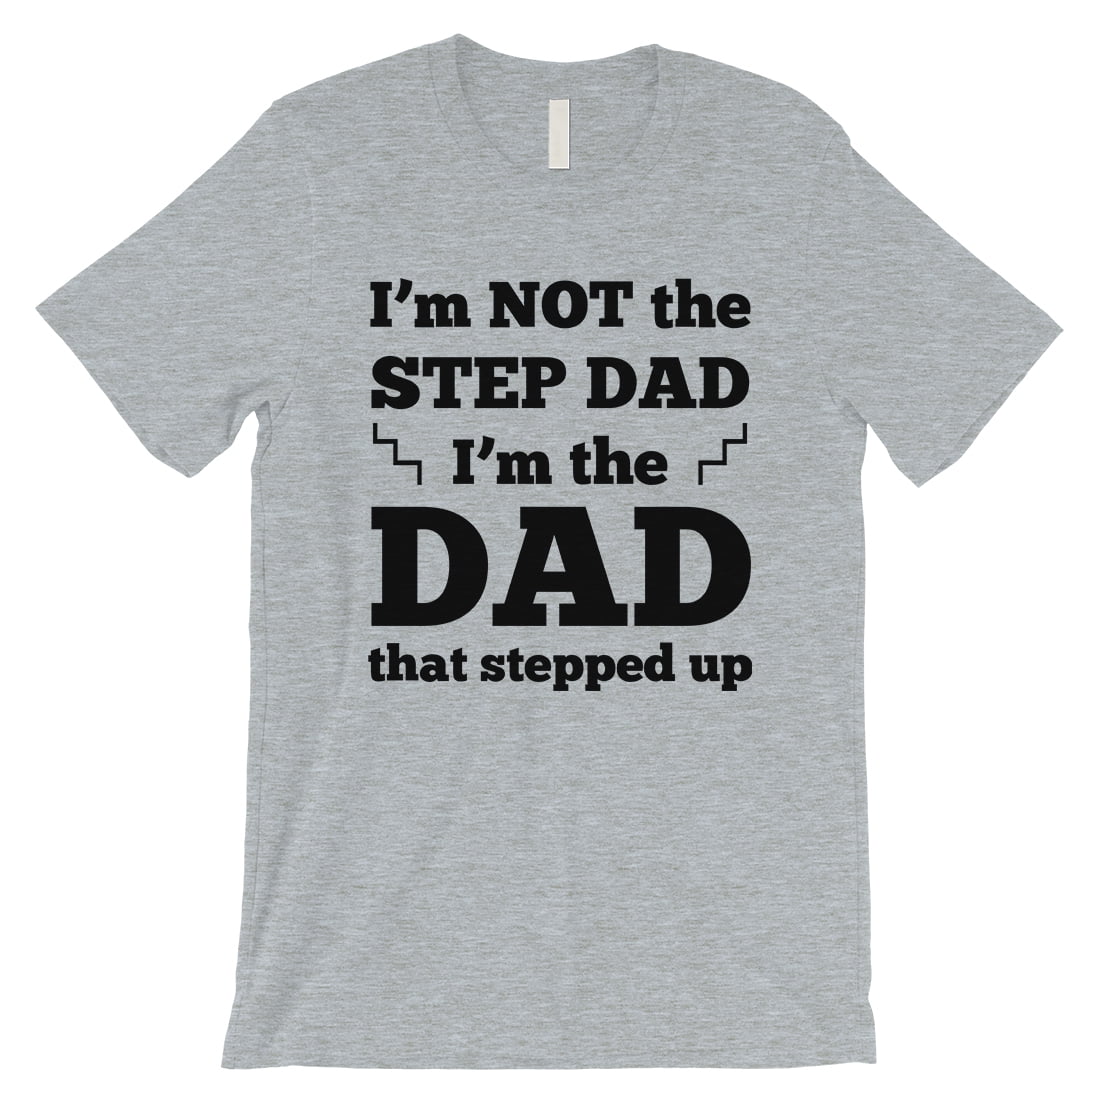 Step Dad Stepped Up Mens Grey Super Supportive Witty Shirt For Dads